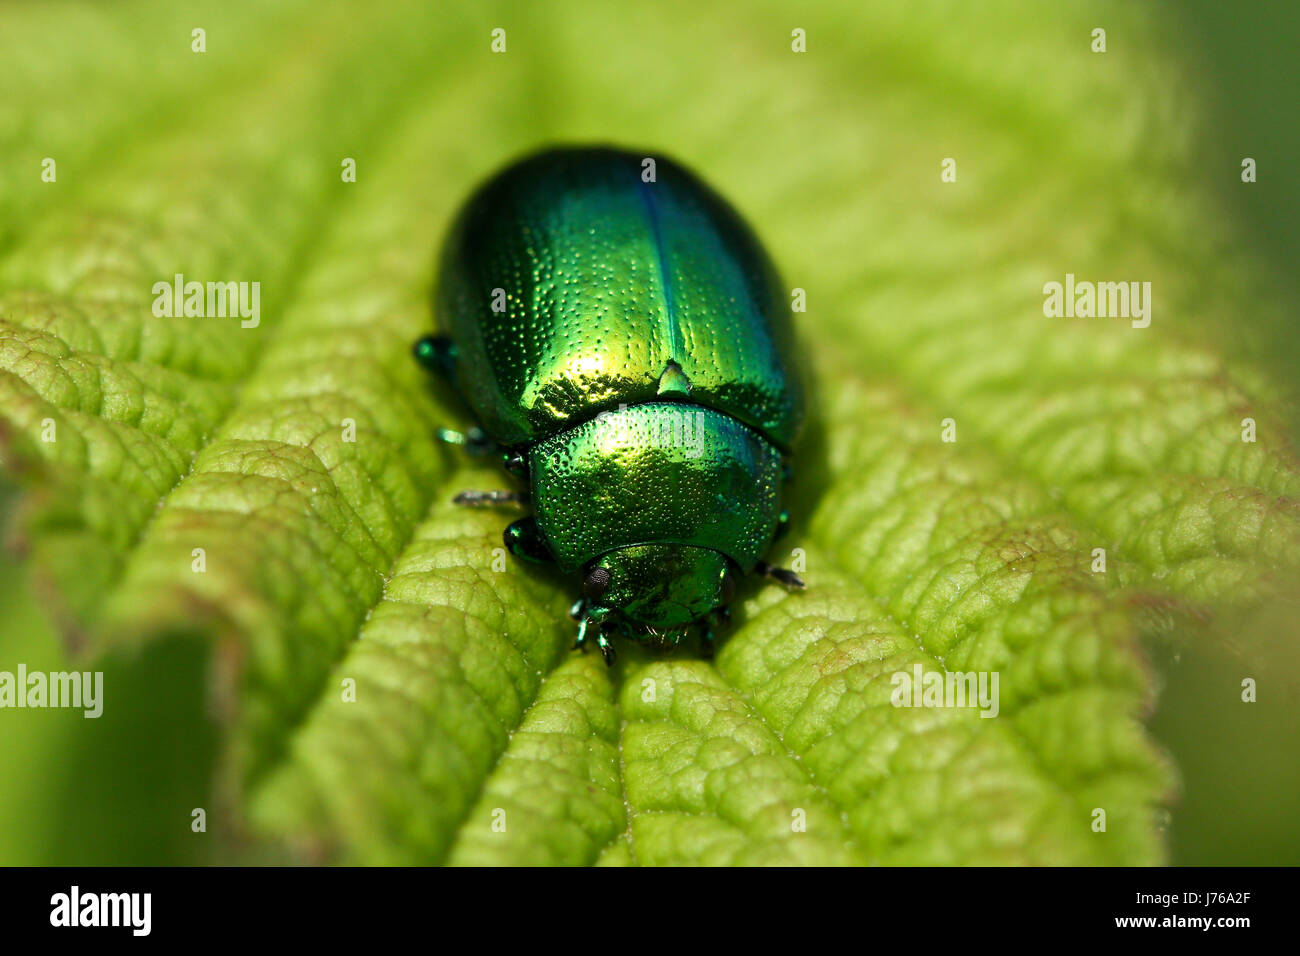 macro close-up macro admission close up view green beetle brilliance glitter Stock Photo